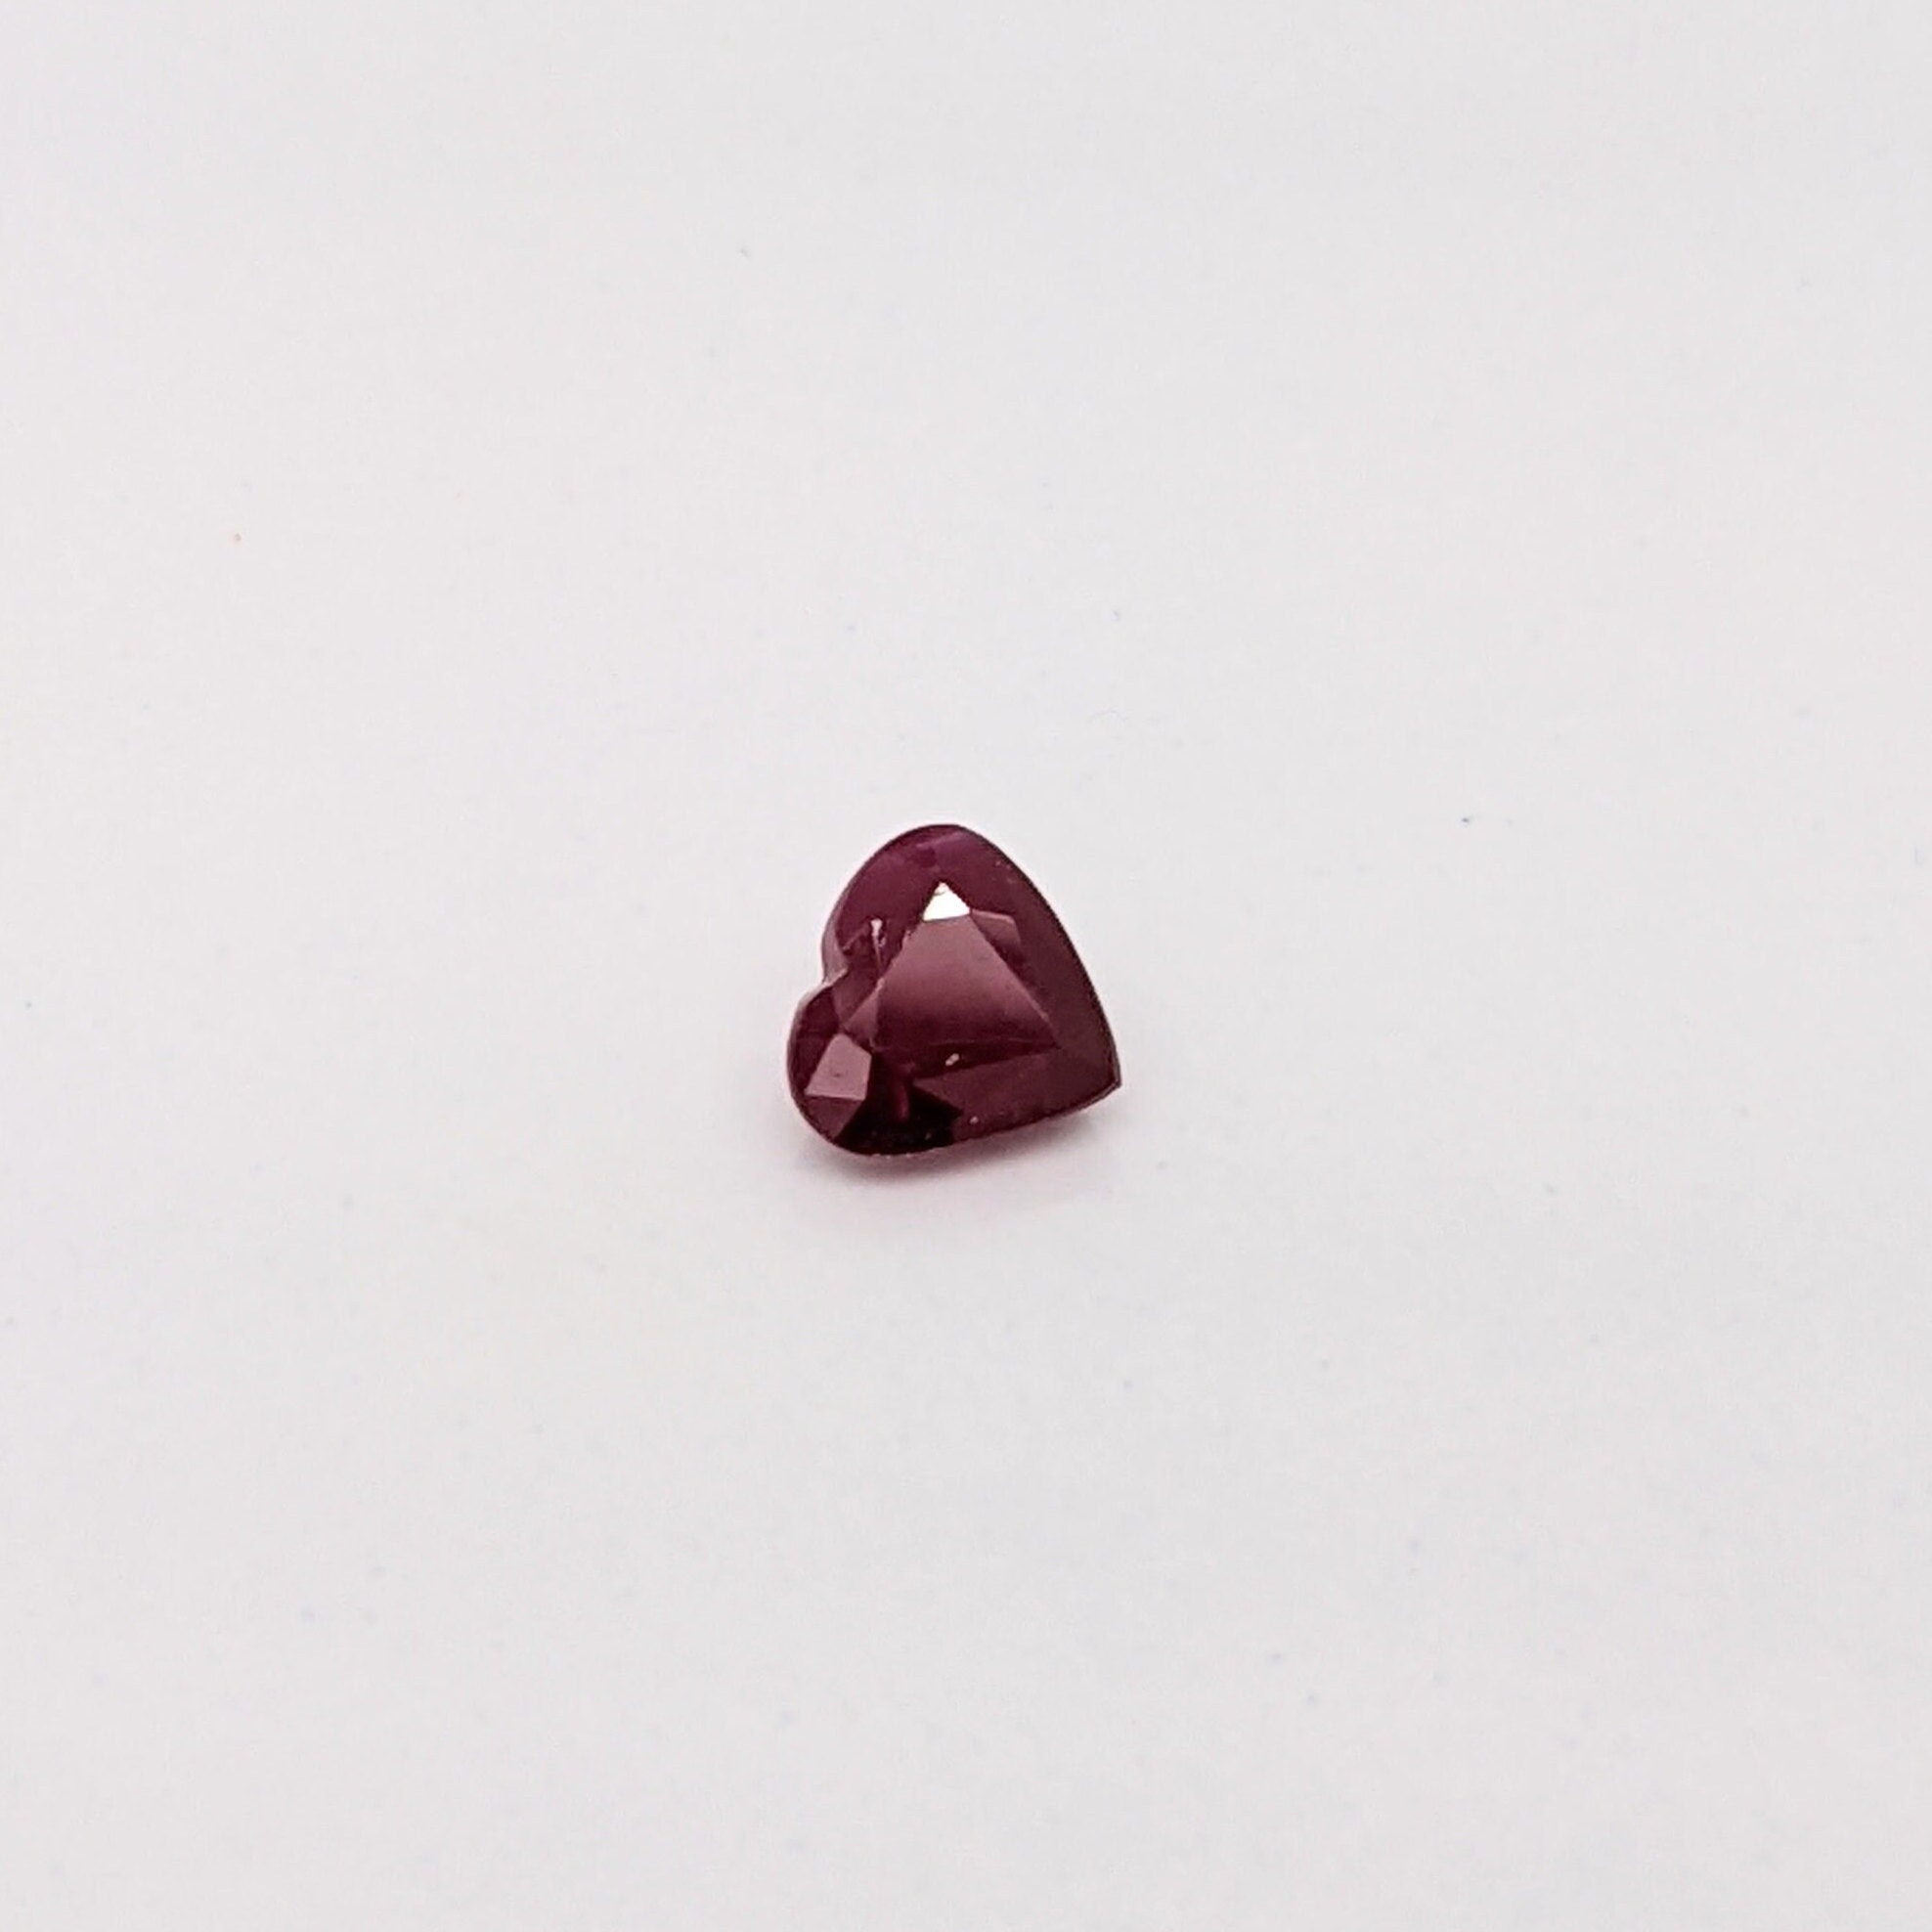 Heart Shape Heated Madagascar Ruby Loose Gemstone | 5mm | July | Pigeon Blood Red | Jewelry Center Stone Set| Certified